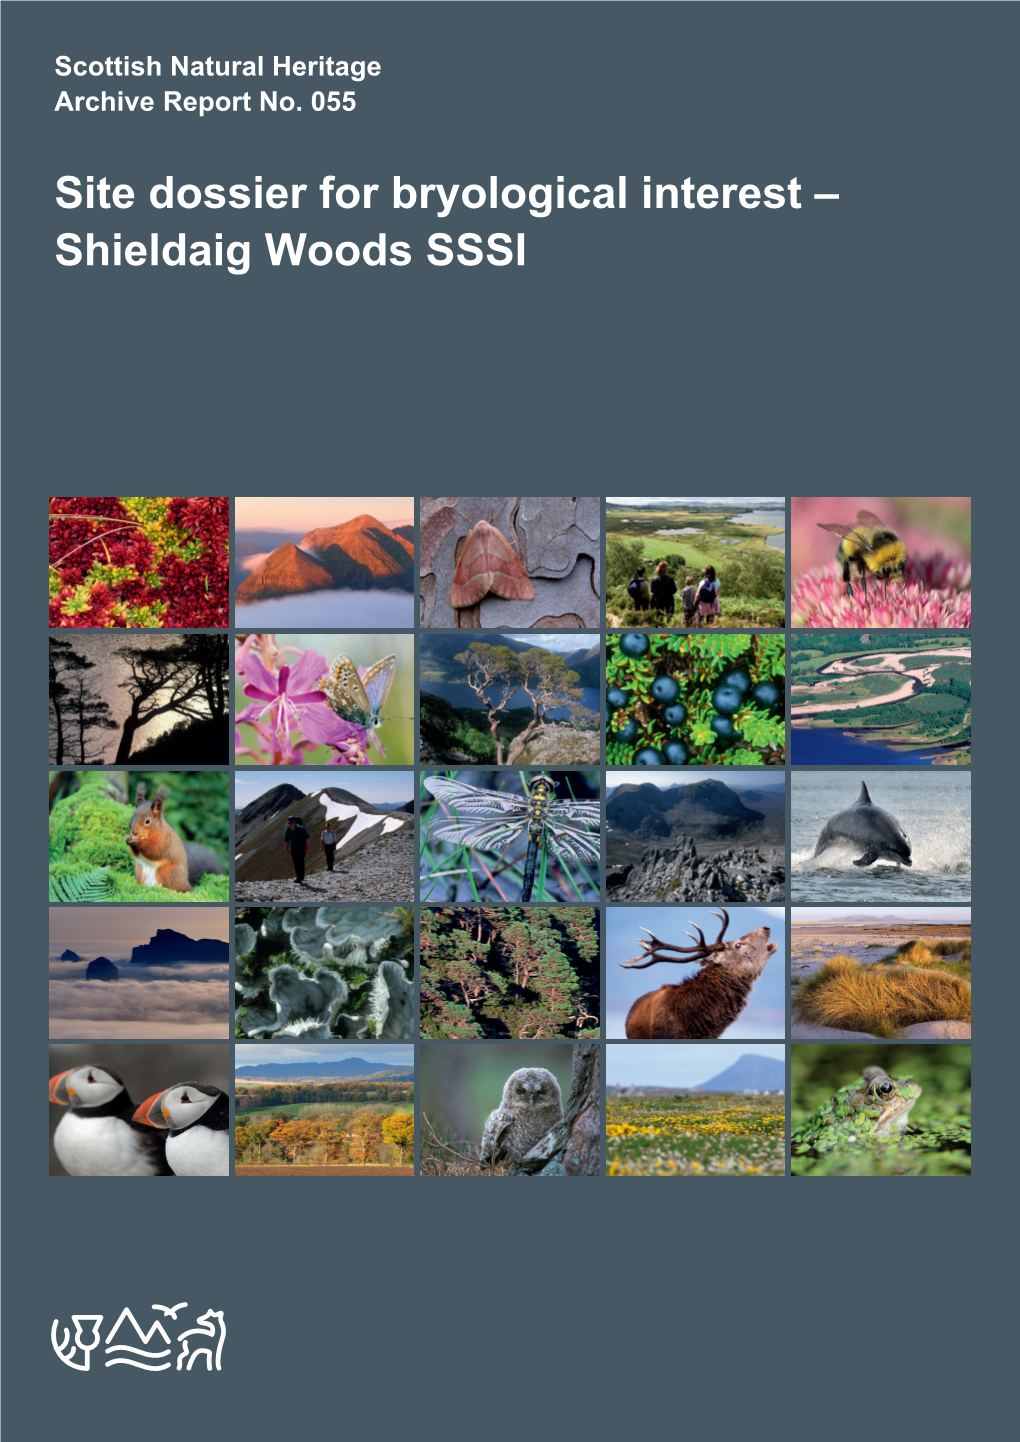 SNH Archive Report 055: Site Dossier for Bryological Interest – Shieldaig Woods SSSI